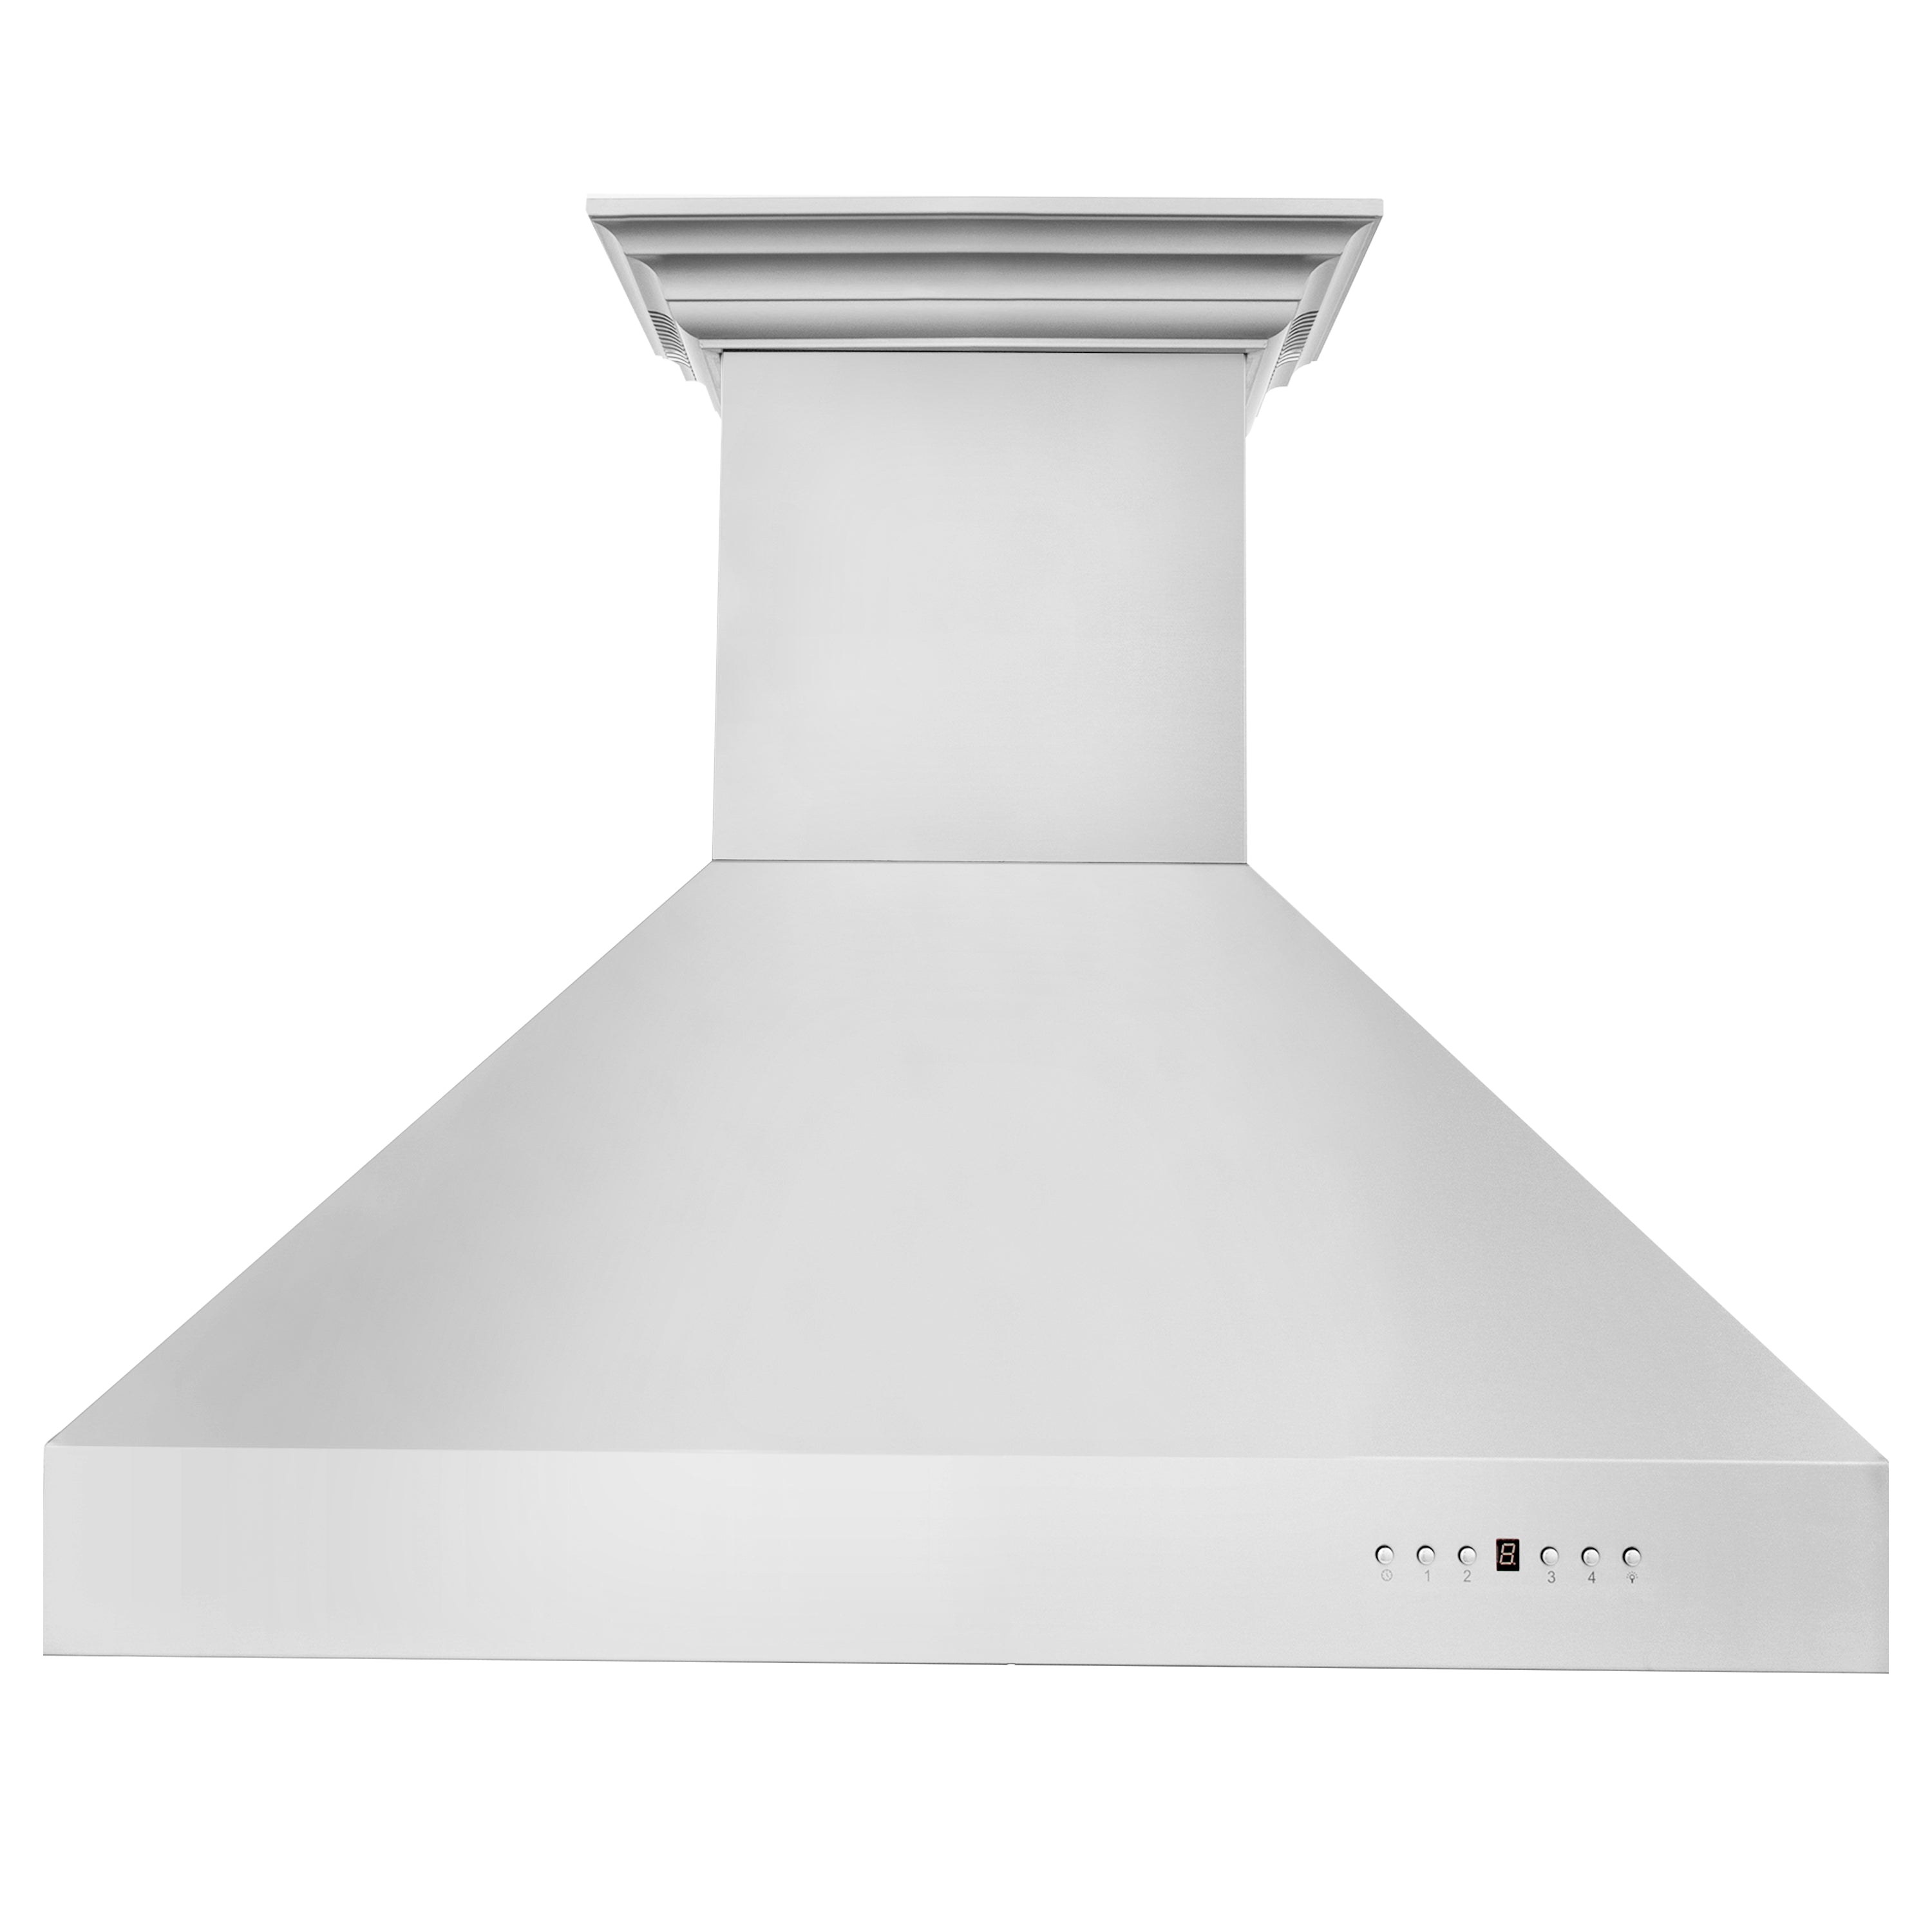 60" ZLINE CrownSound‚Äö√†√∂‚Äö√†√ª Ducted Vent Professional Wall Mount Range Hood in Stainless Steel with Built-in Bluetooth Speakers (697CRN-BT-60)